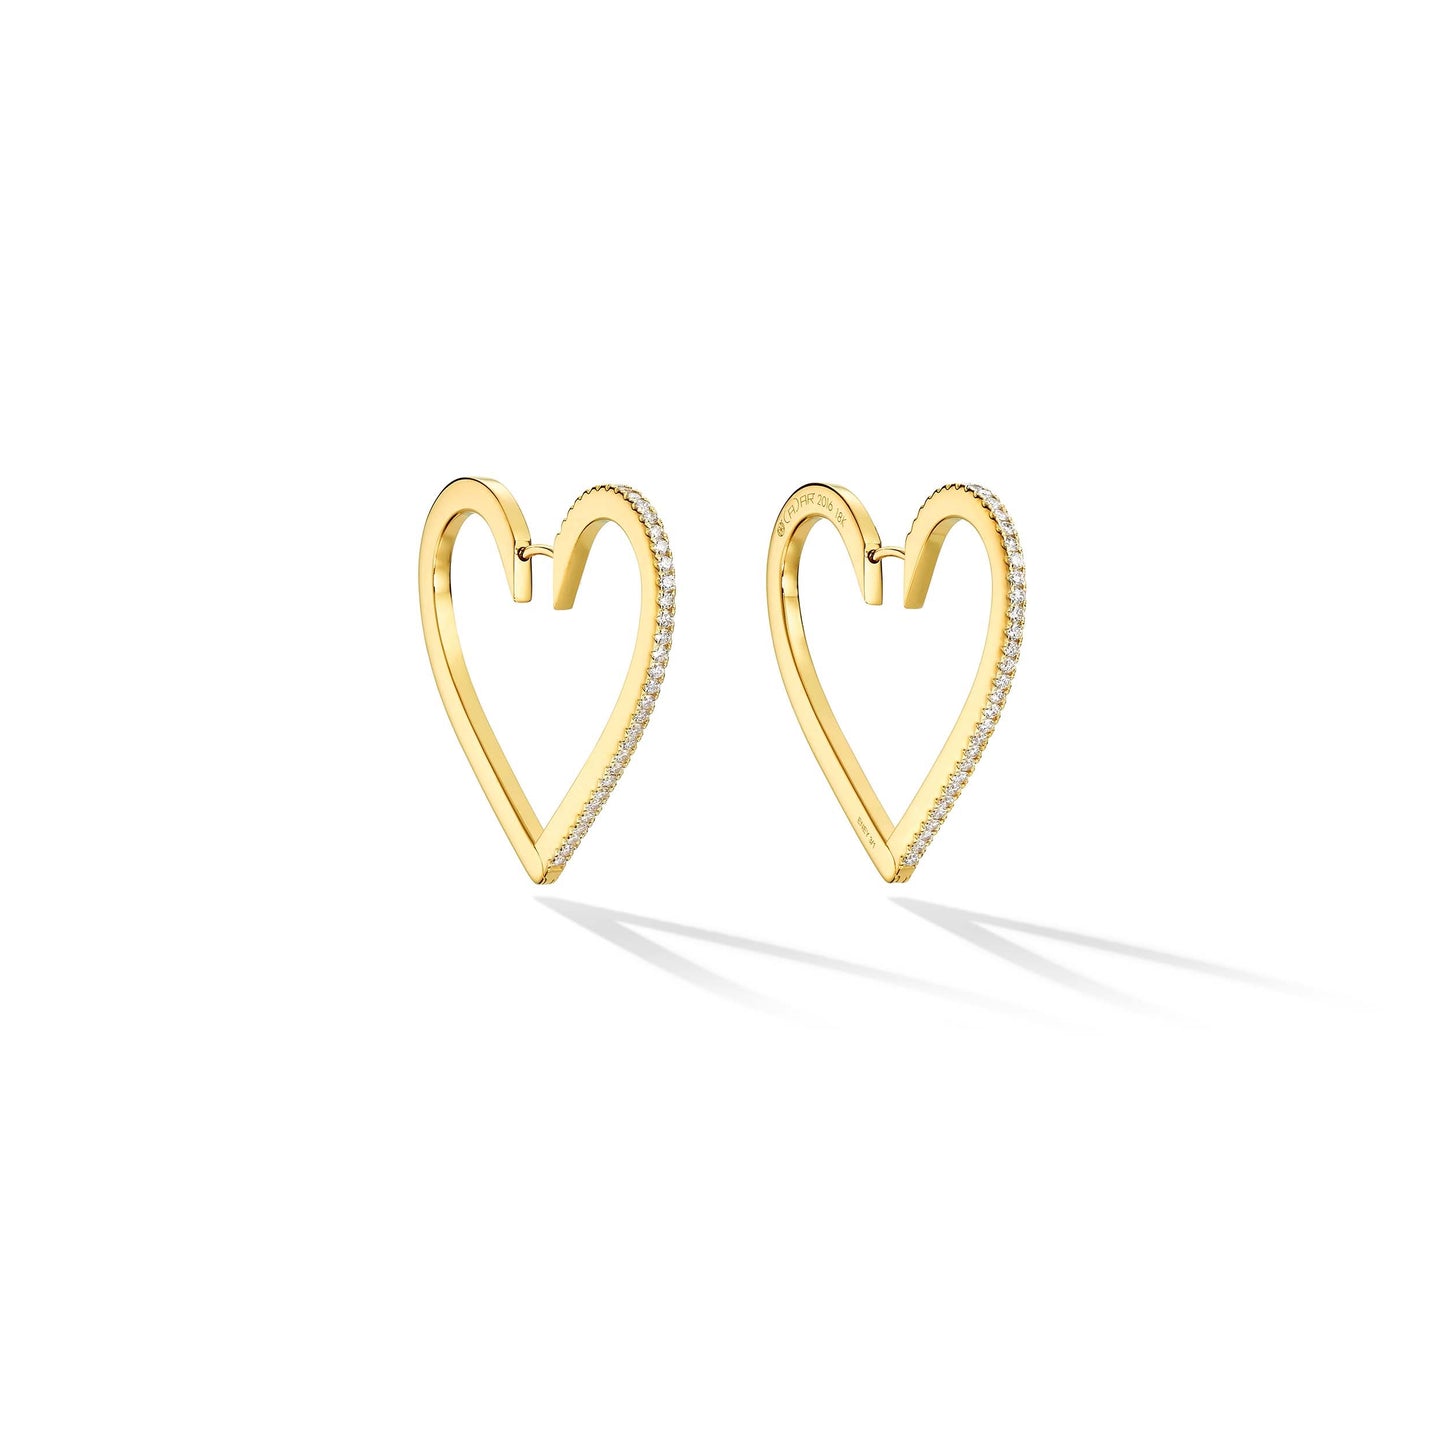 Large Yellow Gold Endless Hoop Earrings with White Diamonds